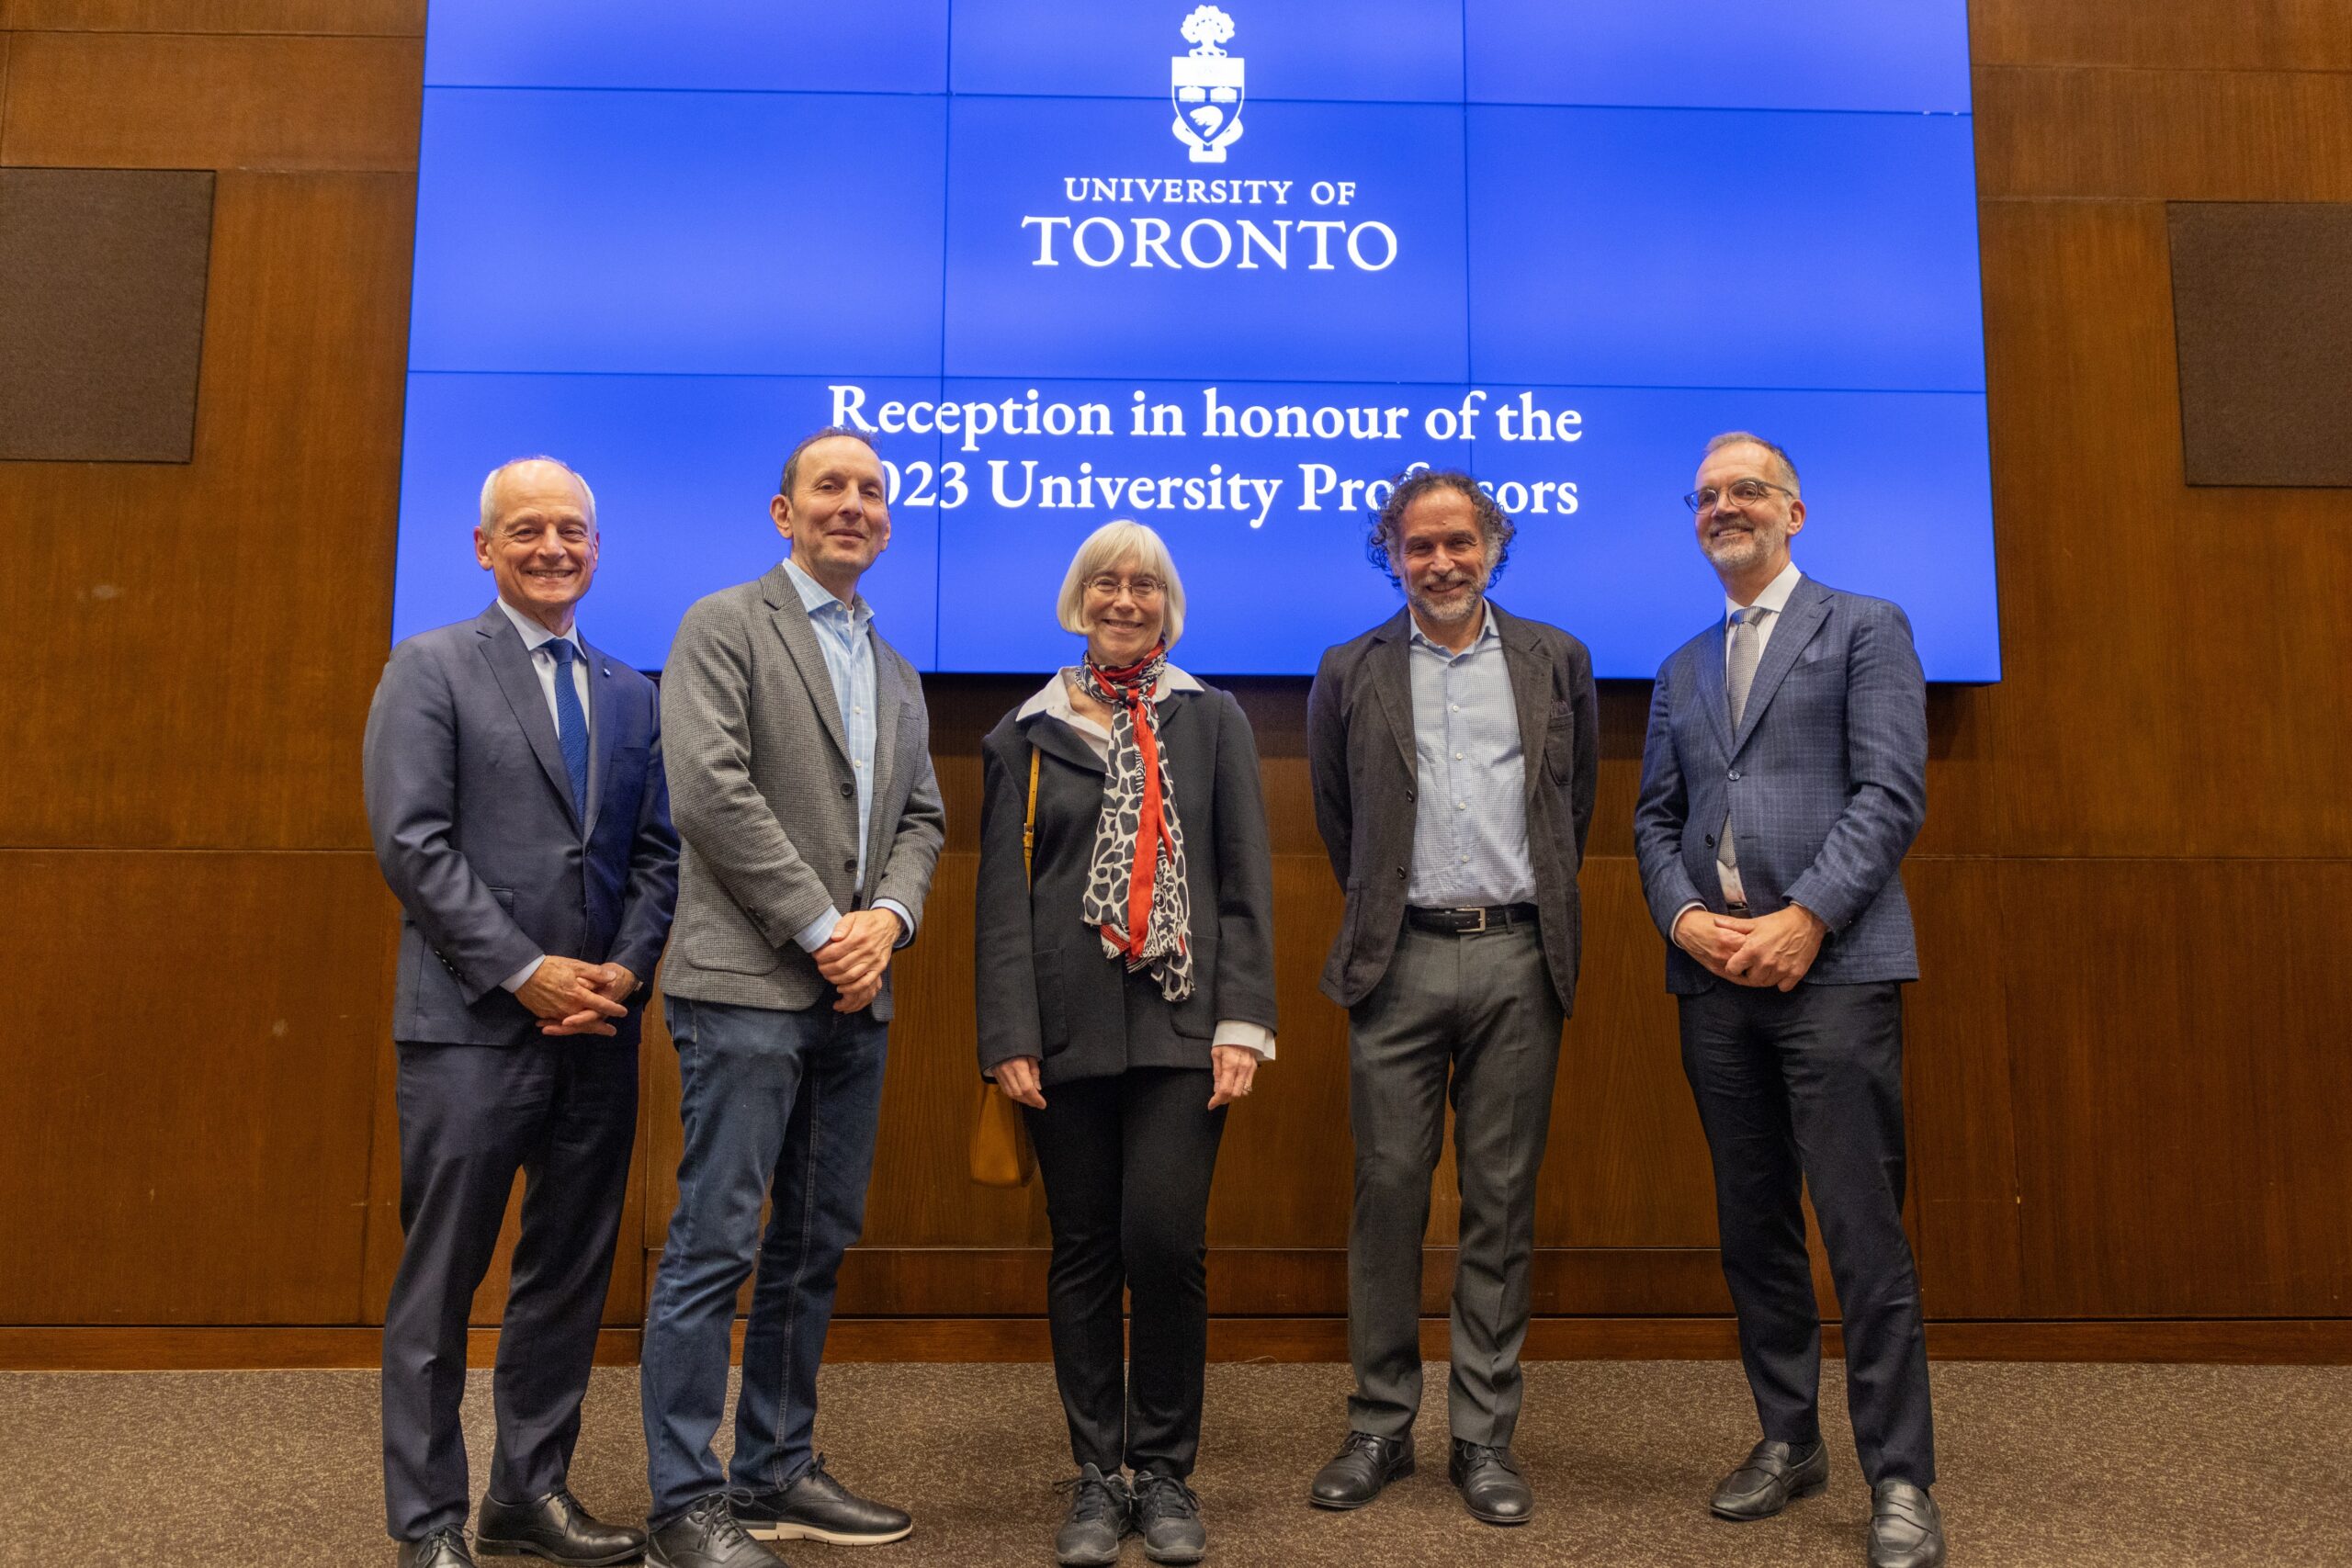 Pictured (L-R): Meric Gertler, Daniel Drucker, Alison Keith, Jeremy Quastel, and Trevor Young (photo by Johnny Guatto)